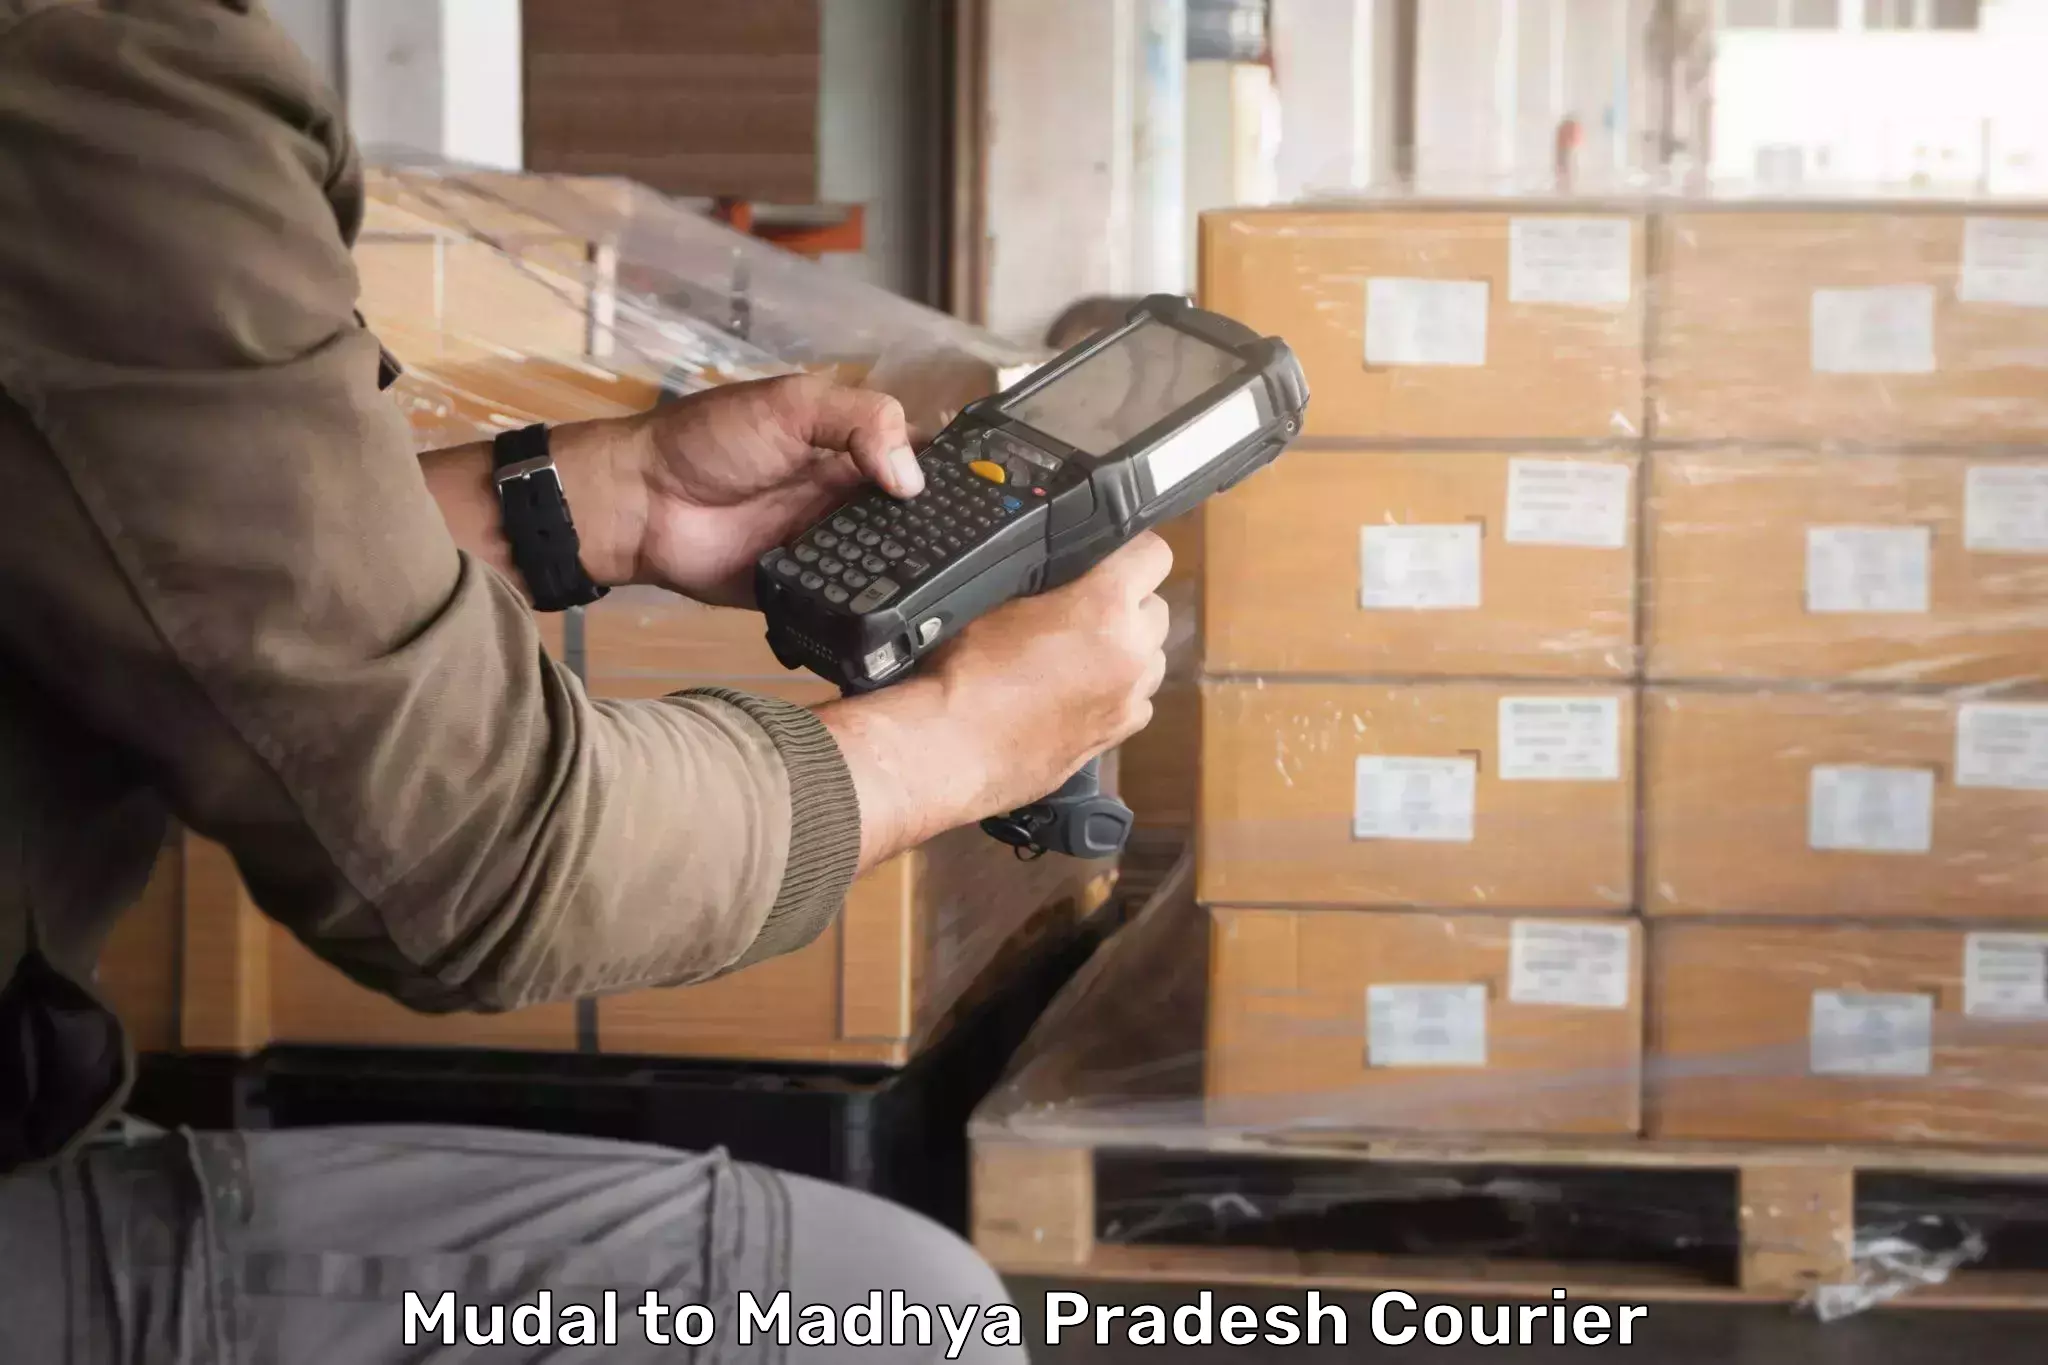 Reliable courier service Mudal to Shahgarh